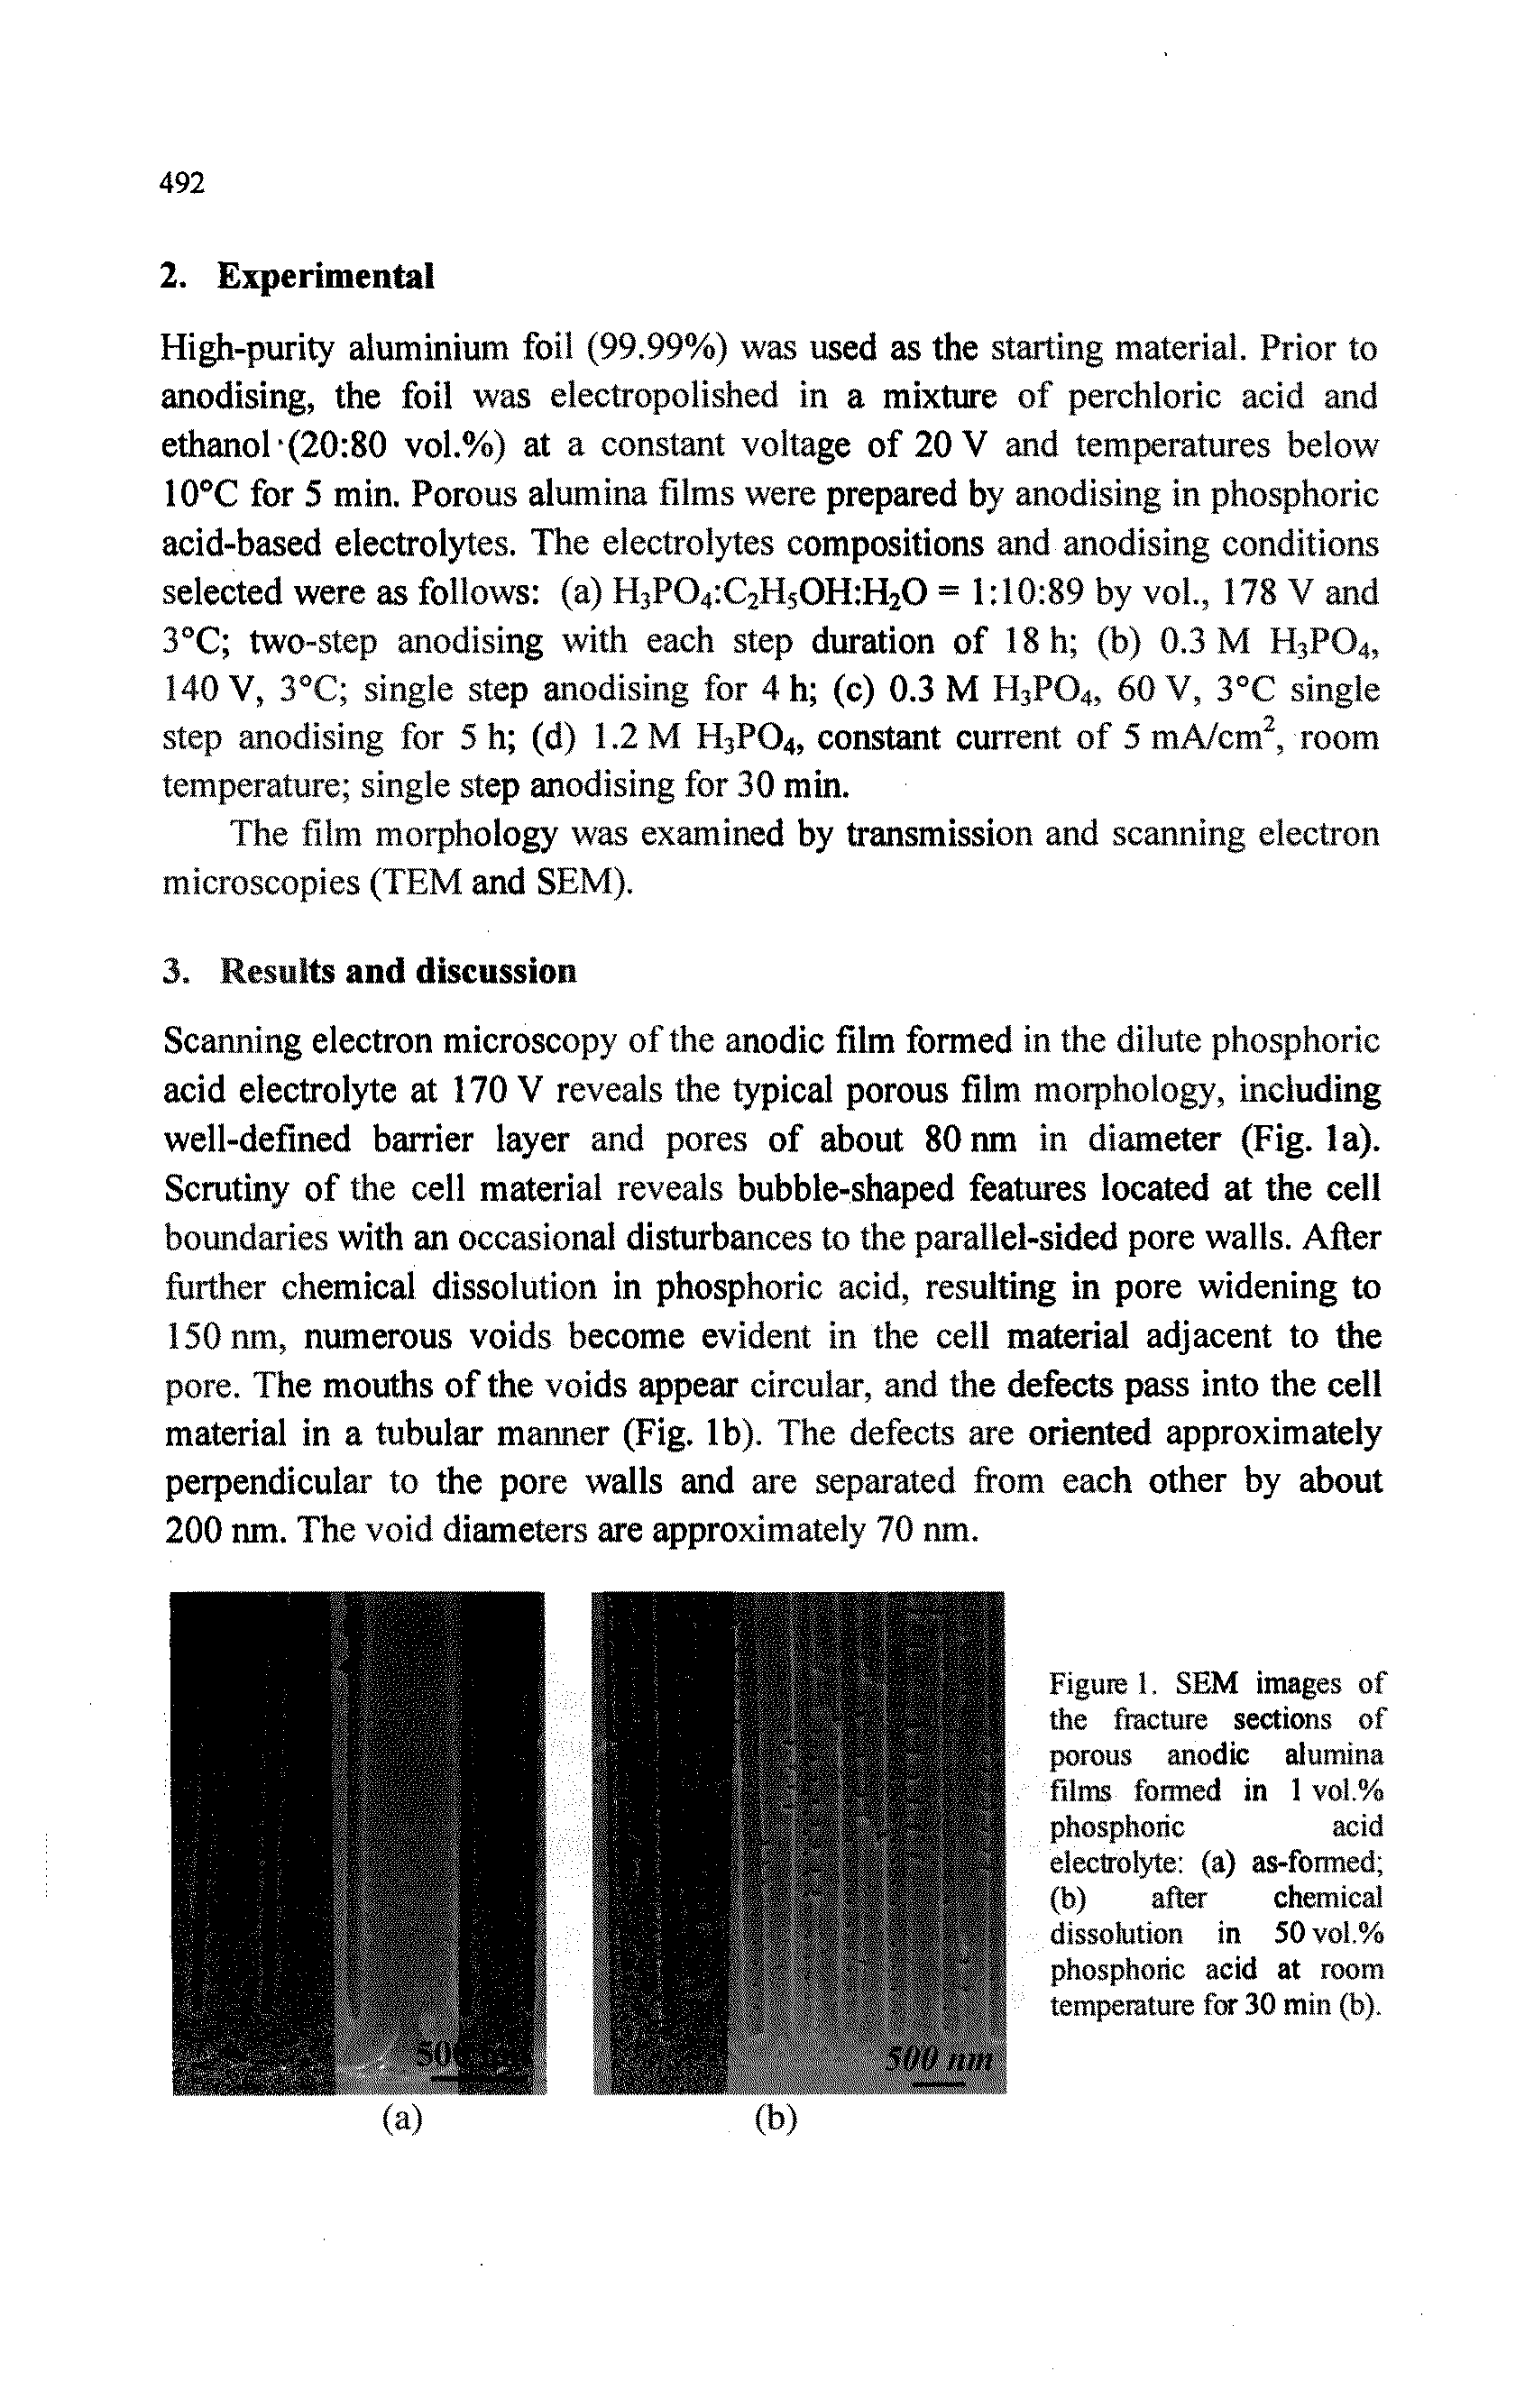 Figure 1. SEM images of the fracture sections of porous anodic alumina films formed in 1 vol.% phosphoric acid...